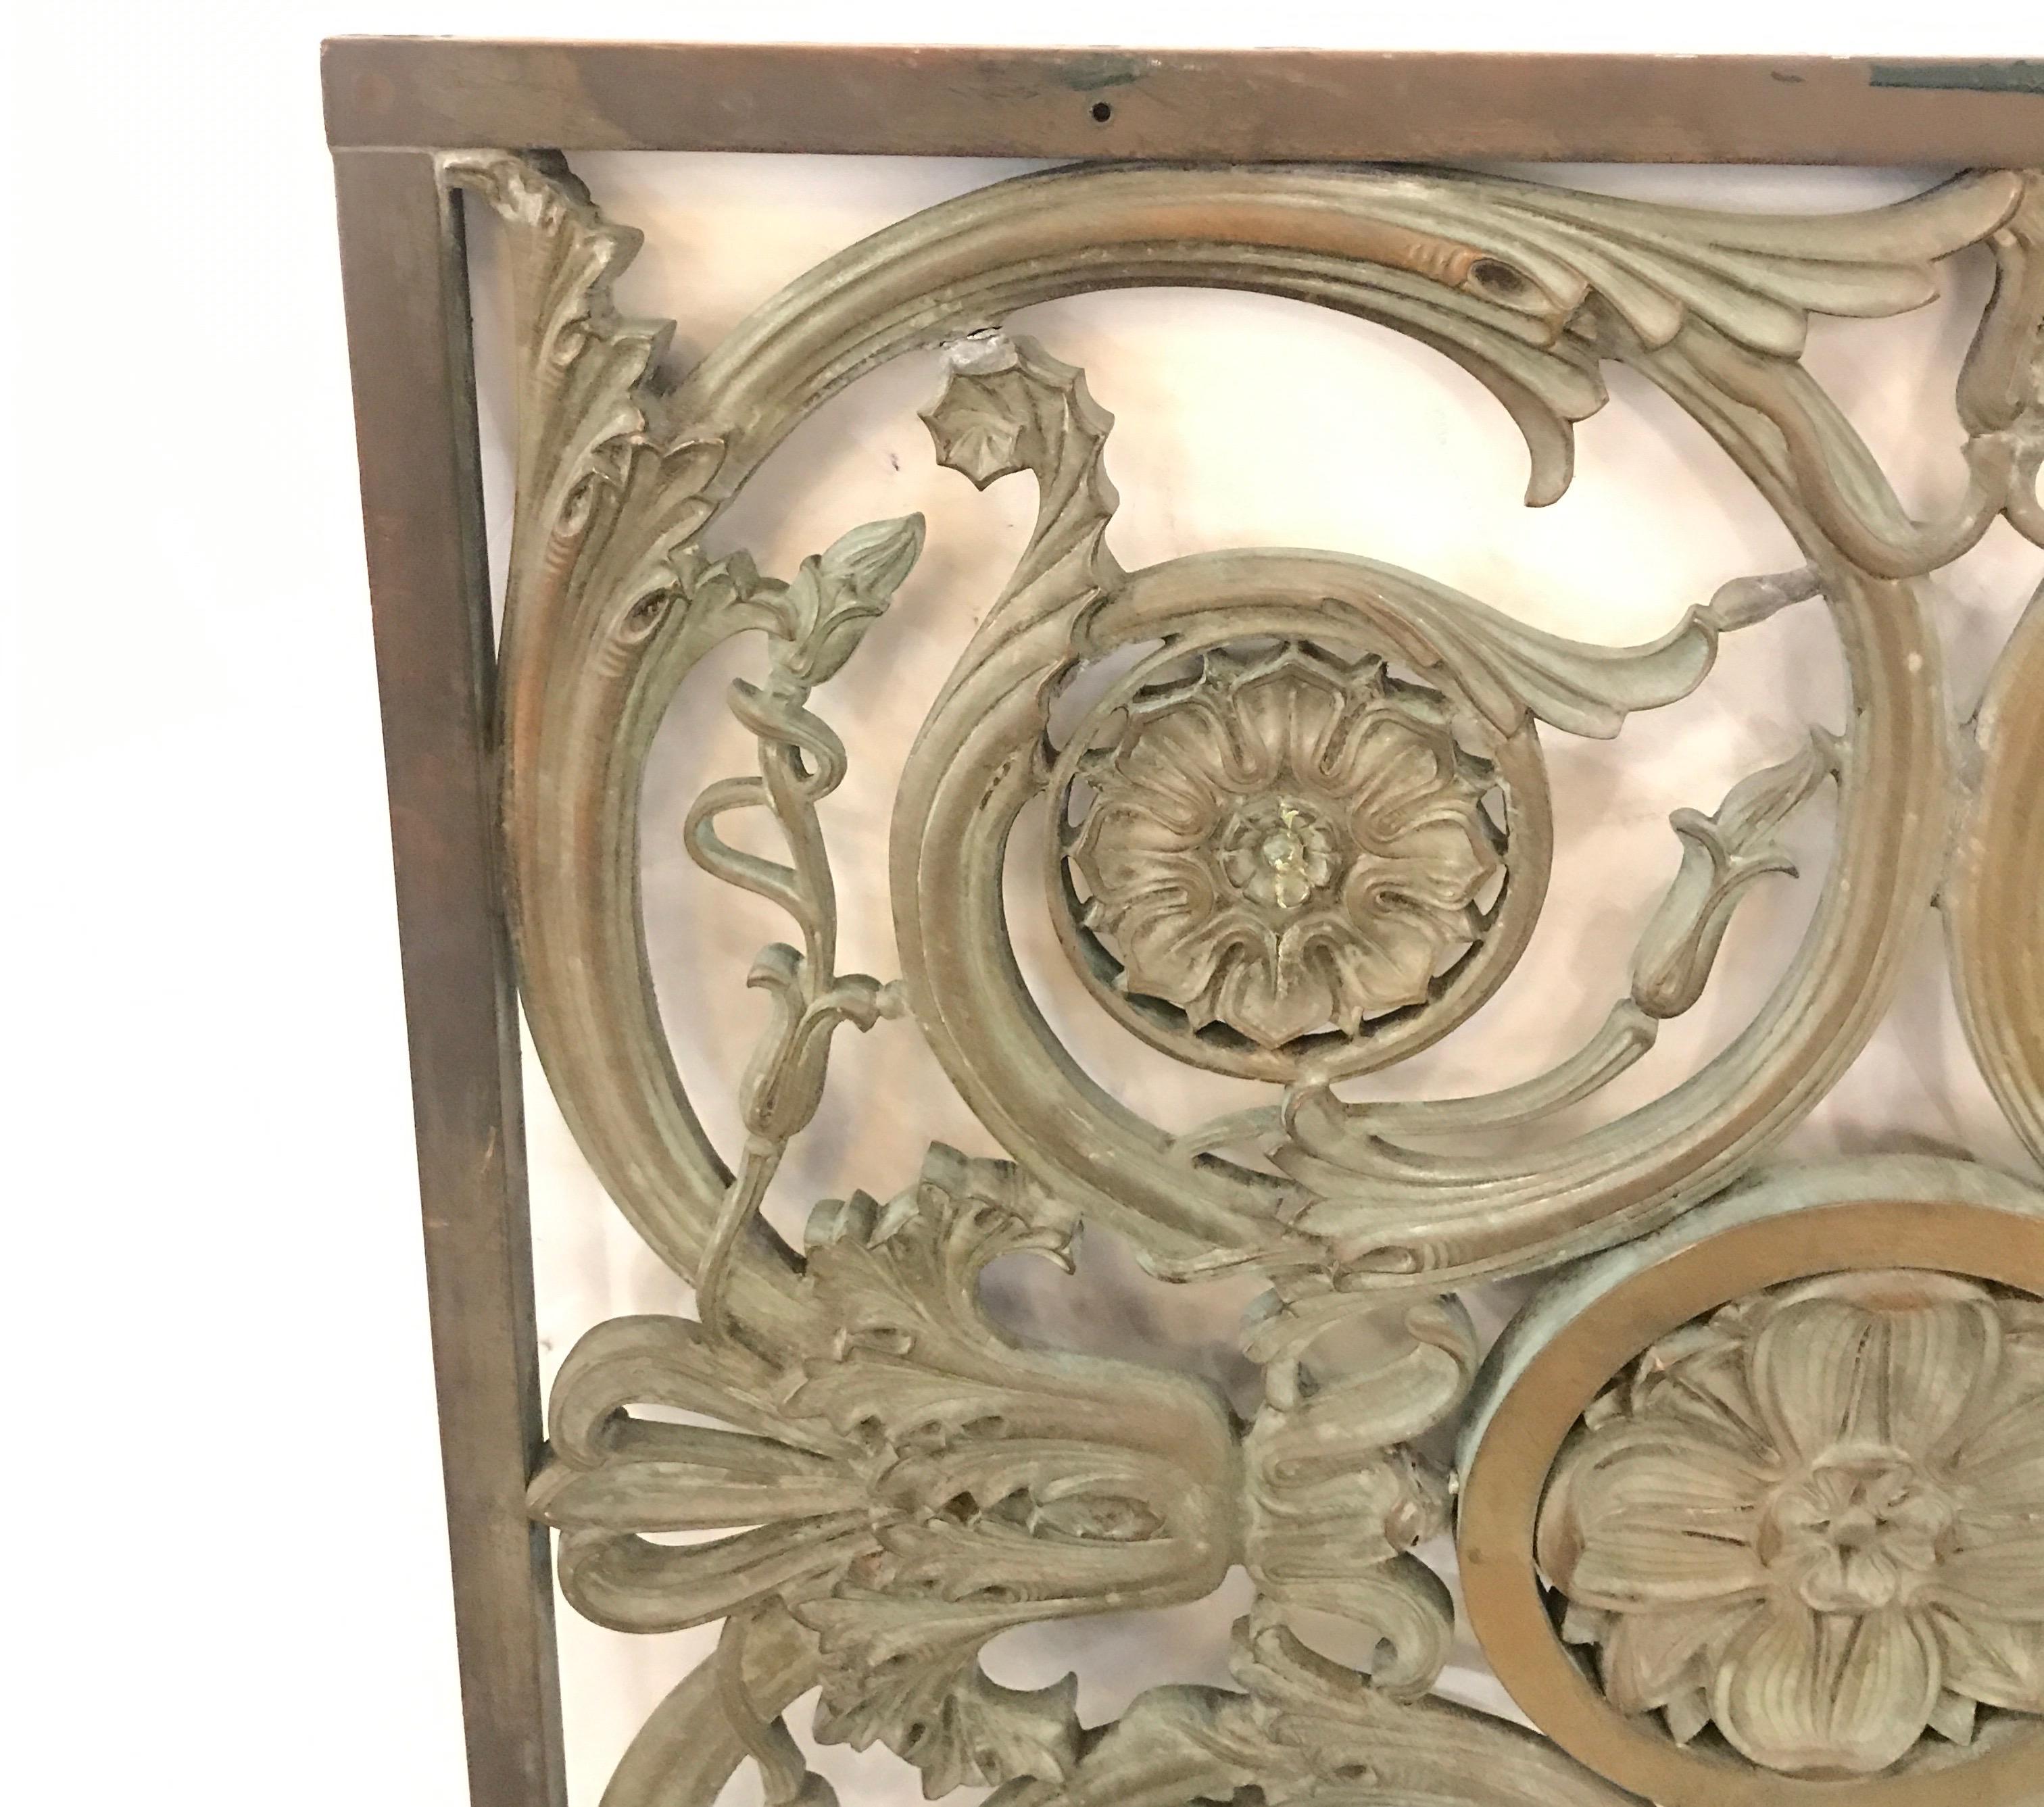 Elegantly cast and great detail with an original weathered finish. The decorative panel measures: 25 by 25 with the frame around measuring 35 inches tall.